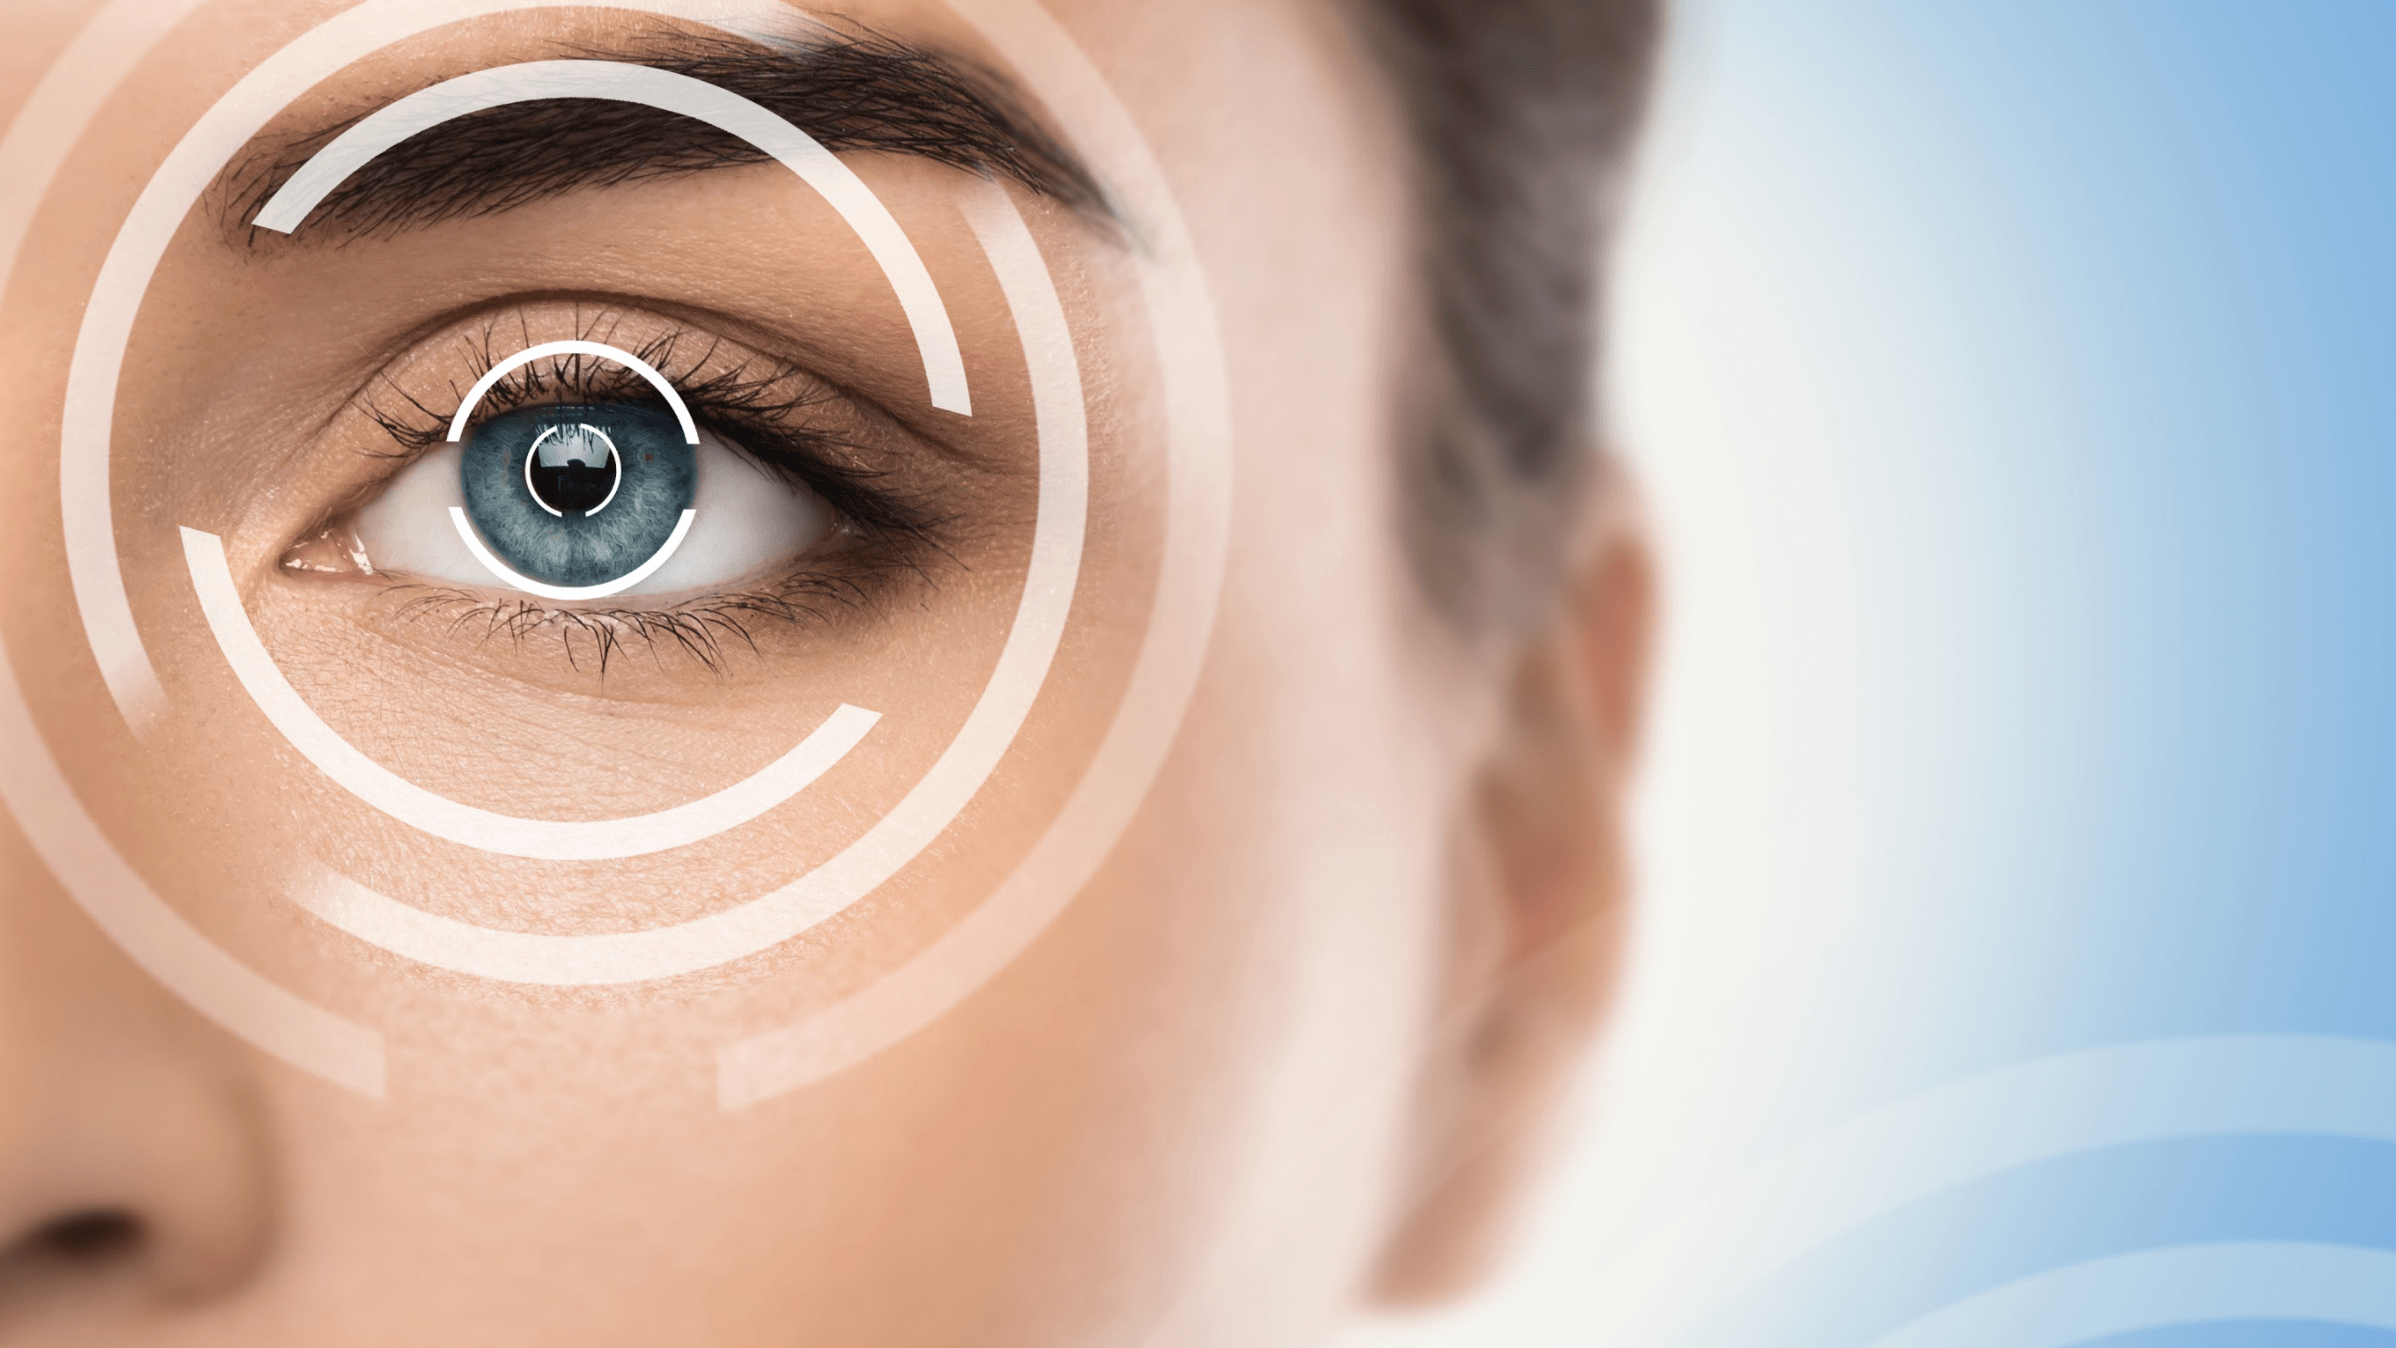 How Long Does Blurry Vision Last After LASIK Eye Surgery?